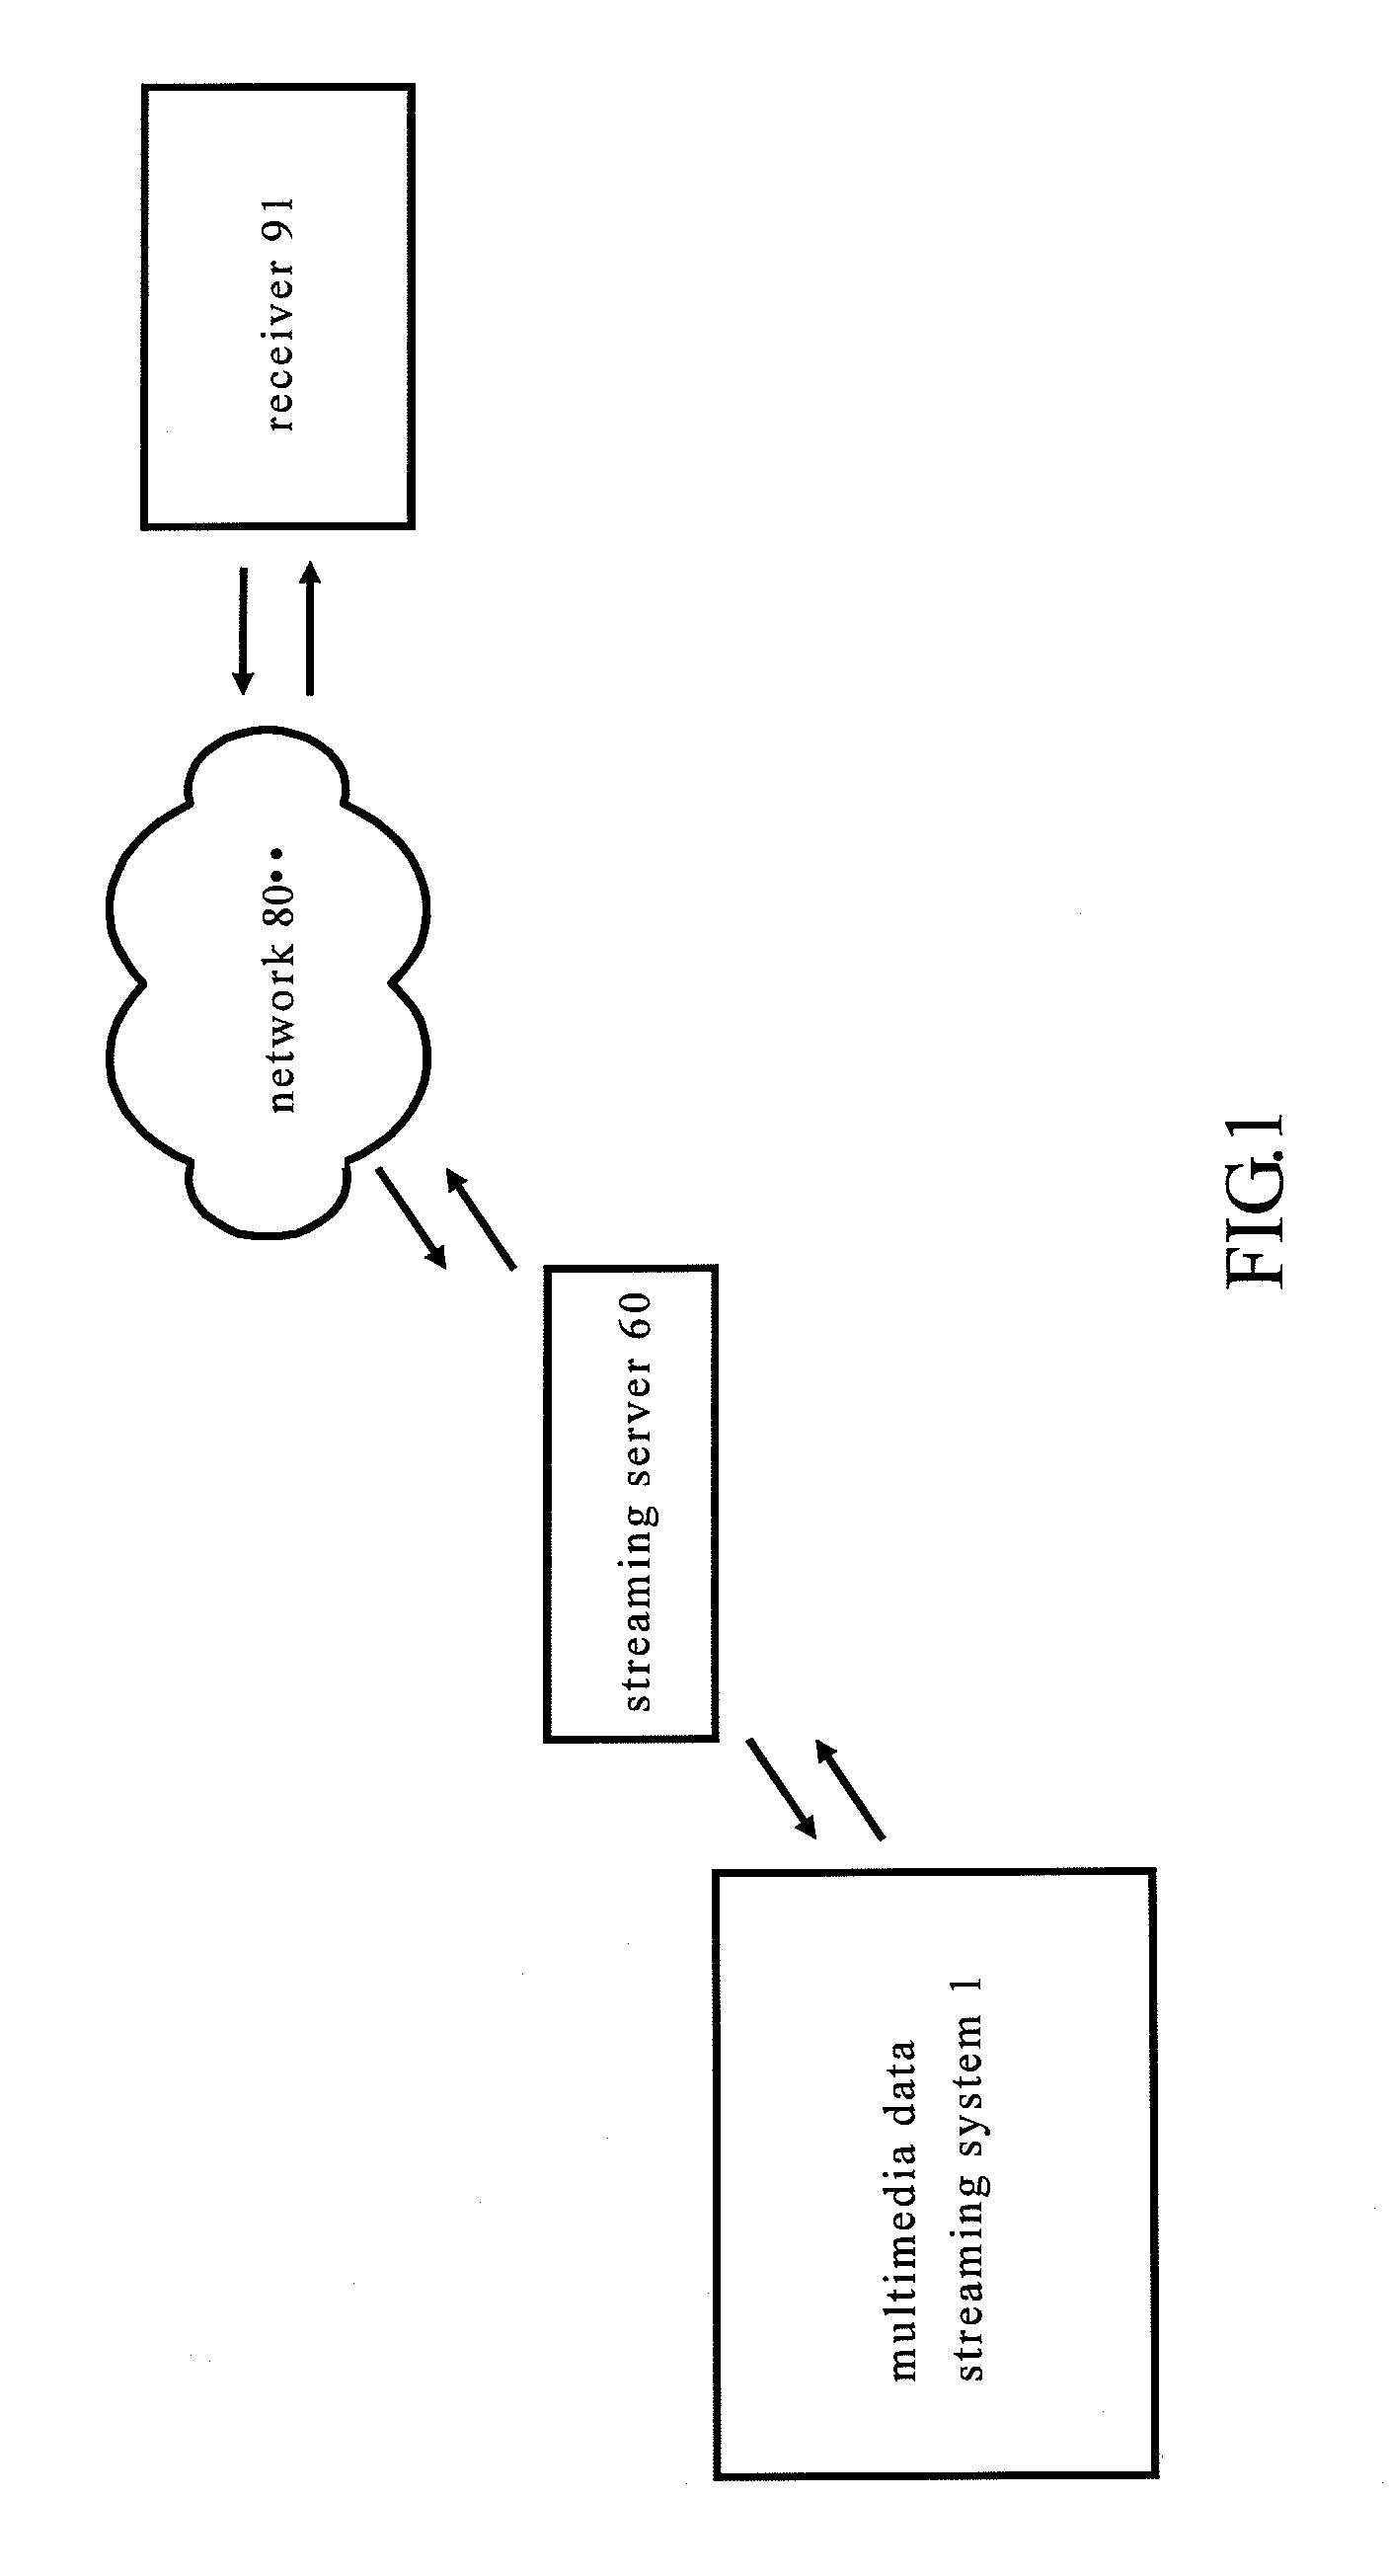 Multimedia Data Streaming System and Method Thereof